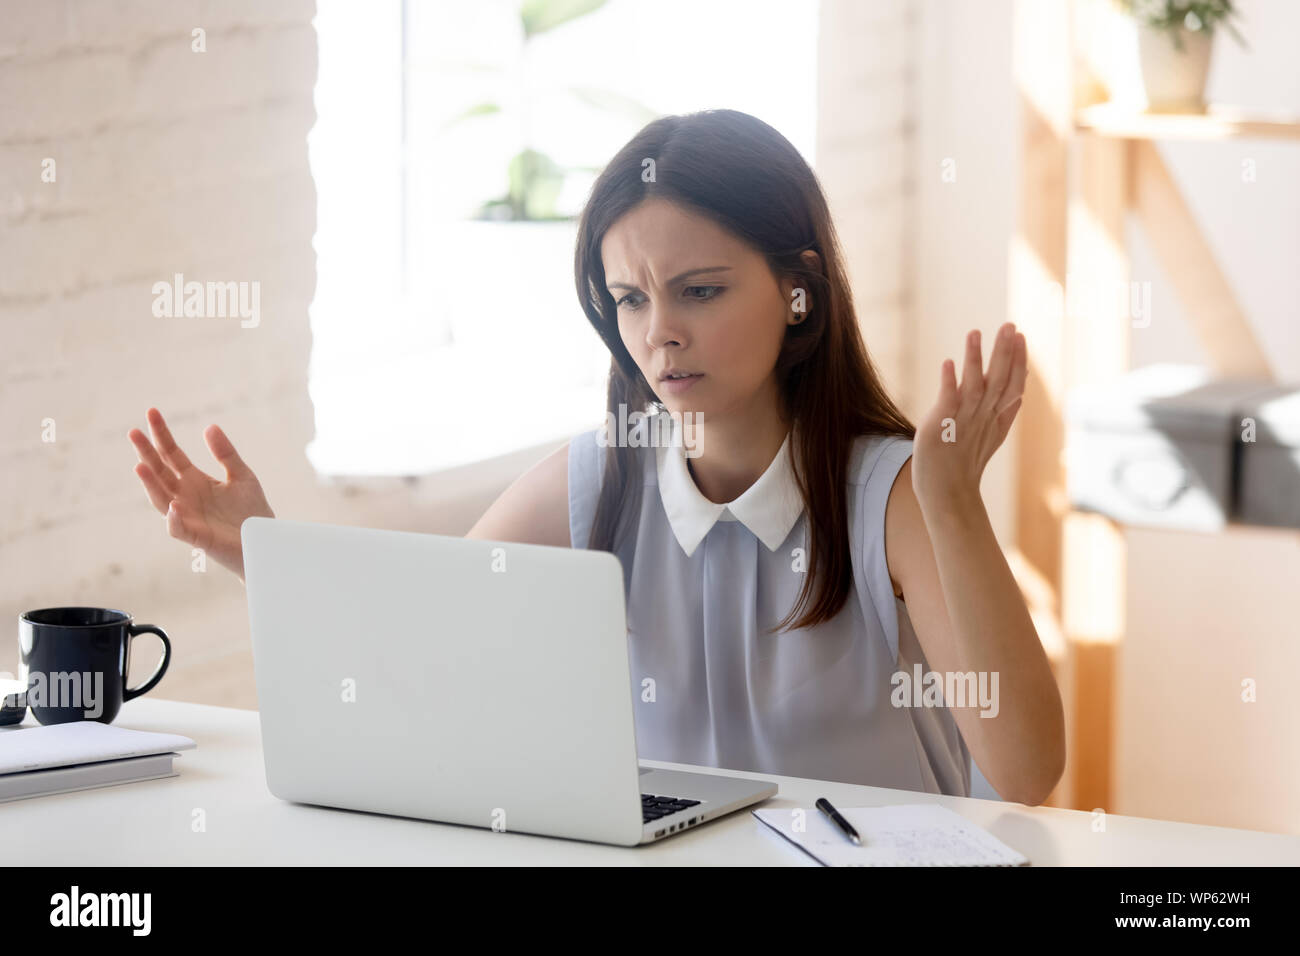 Confused girl feel frustrated having computer problems working Stock Photo